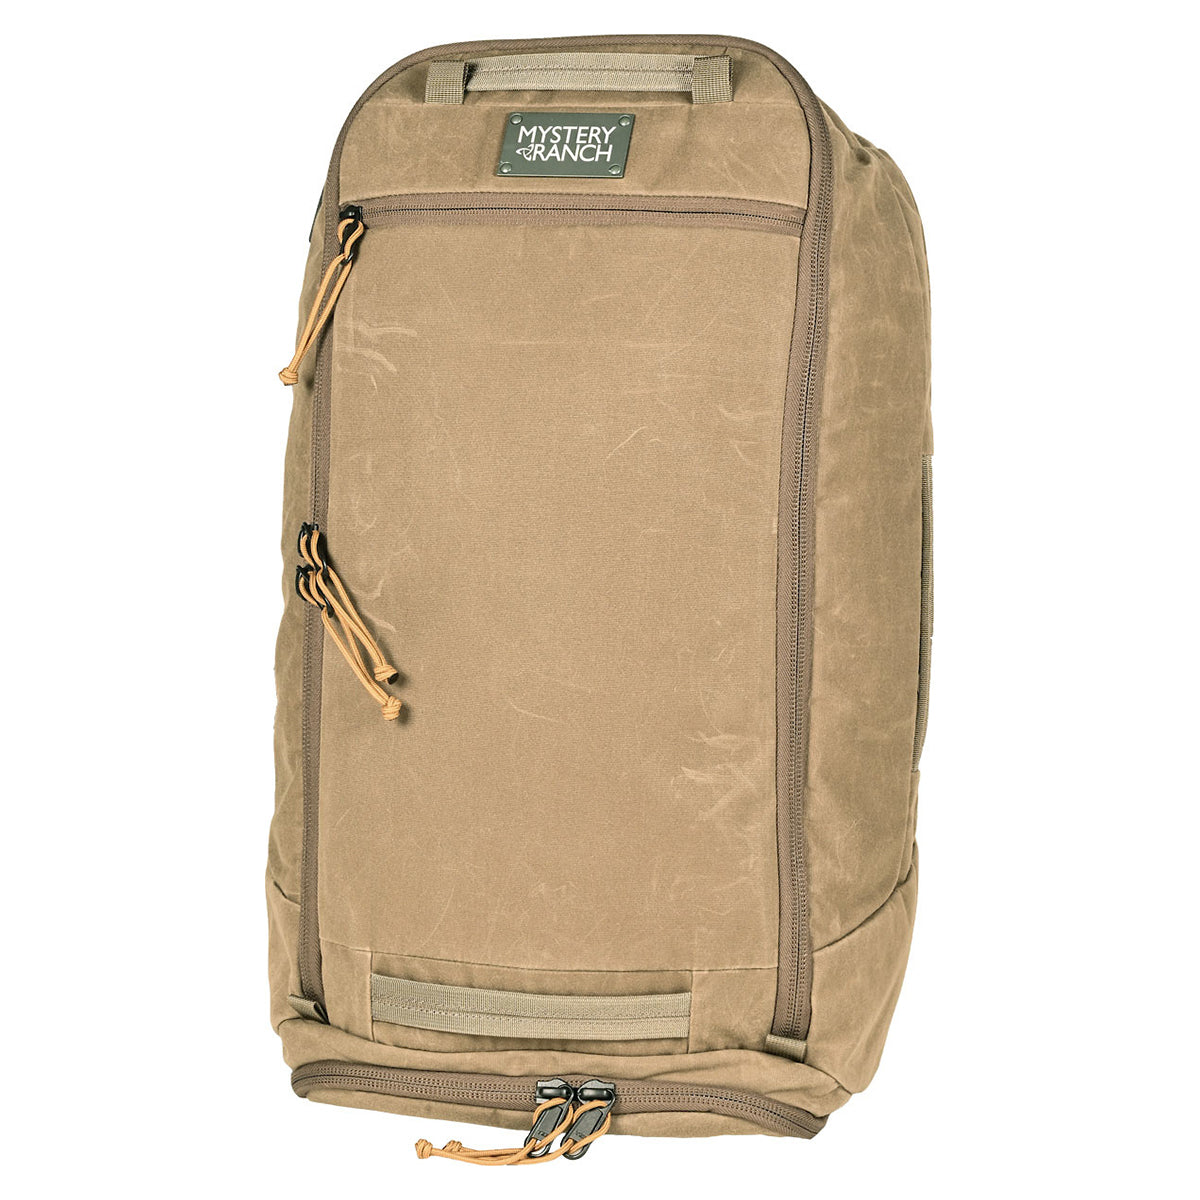 Mystery Ranch Mission 55L Duffel Bag | Shop at GOHUNT